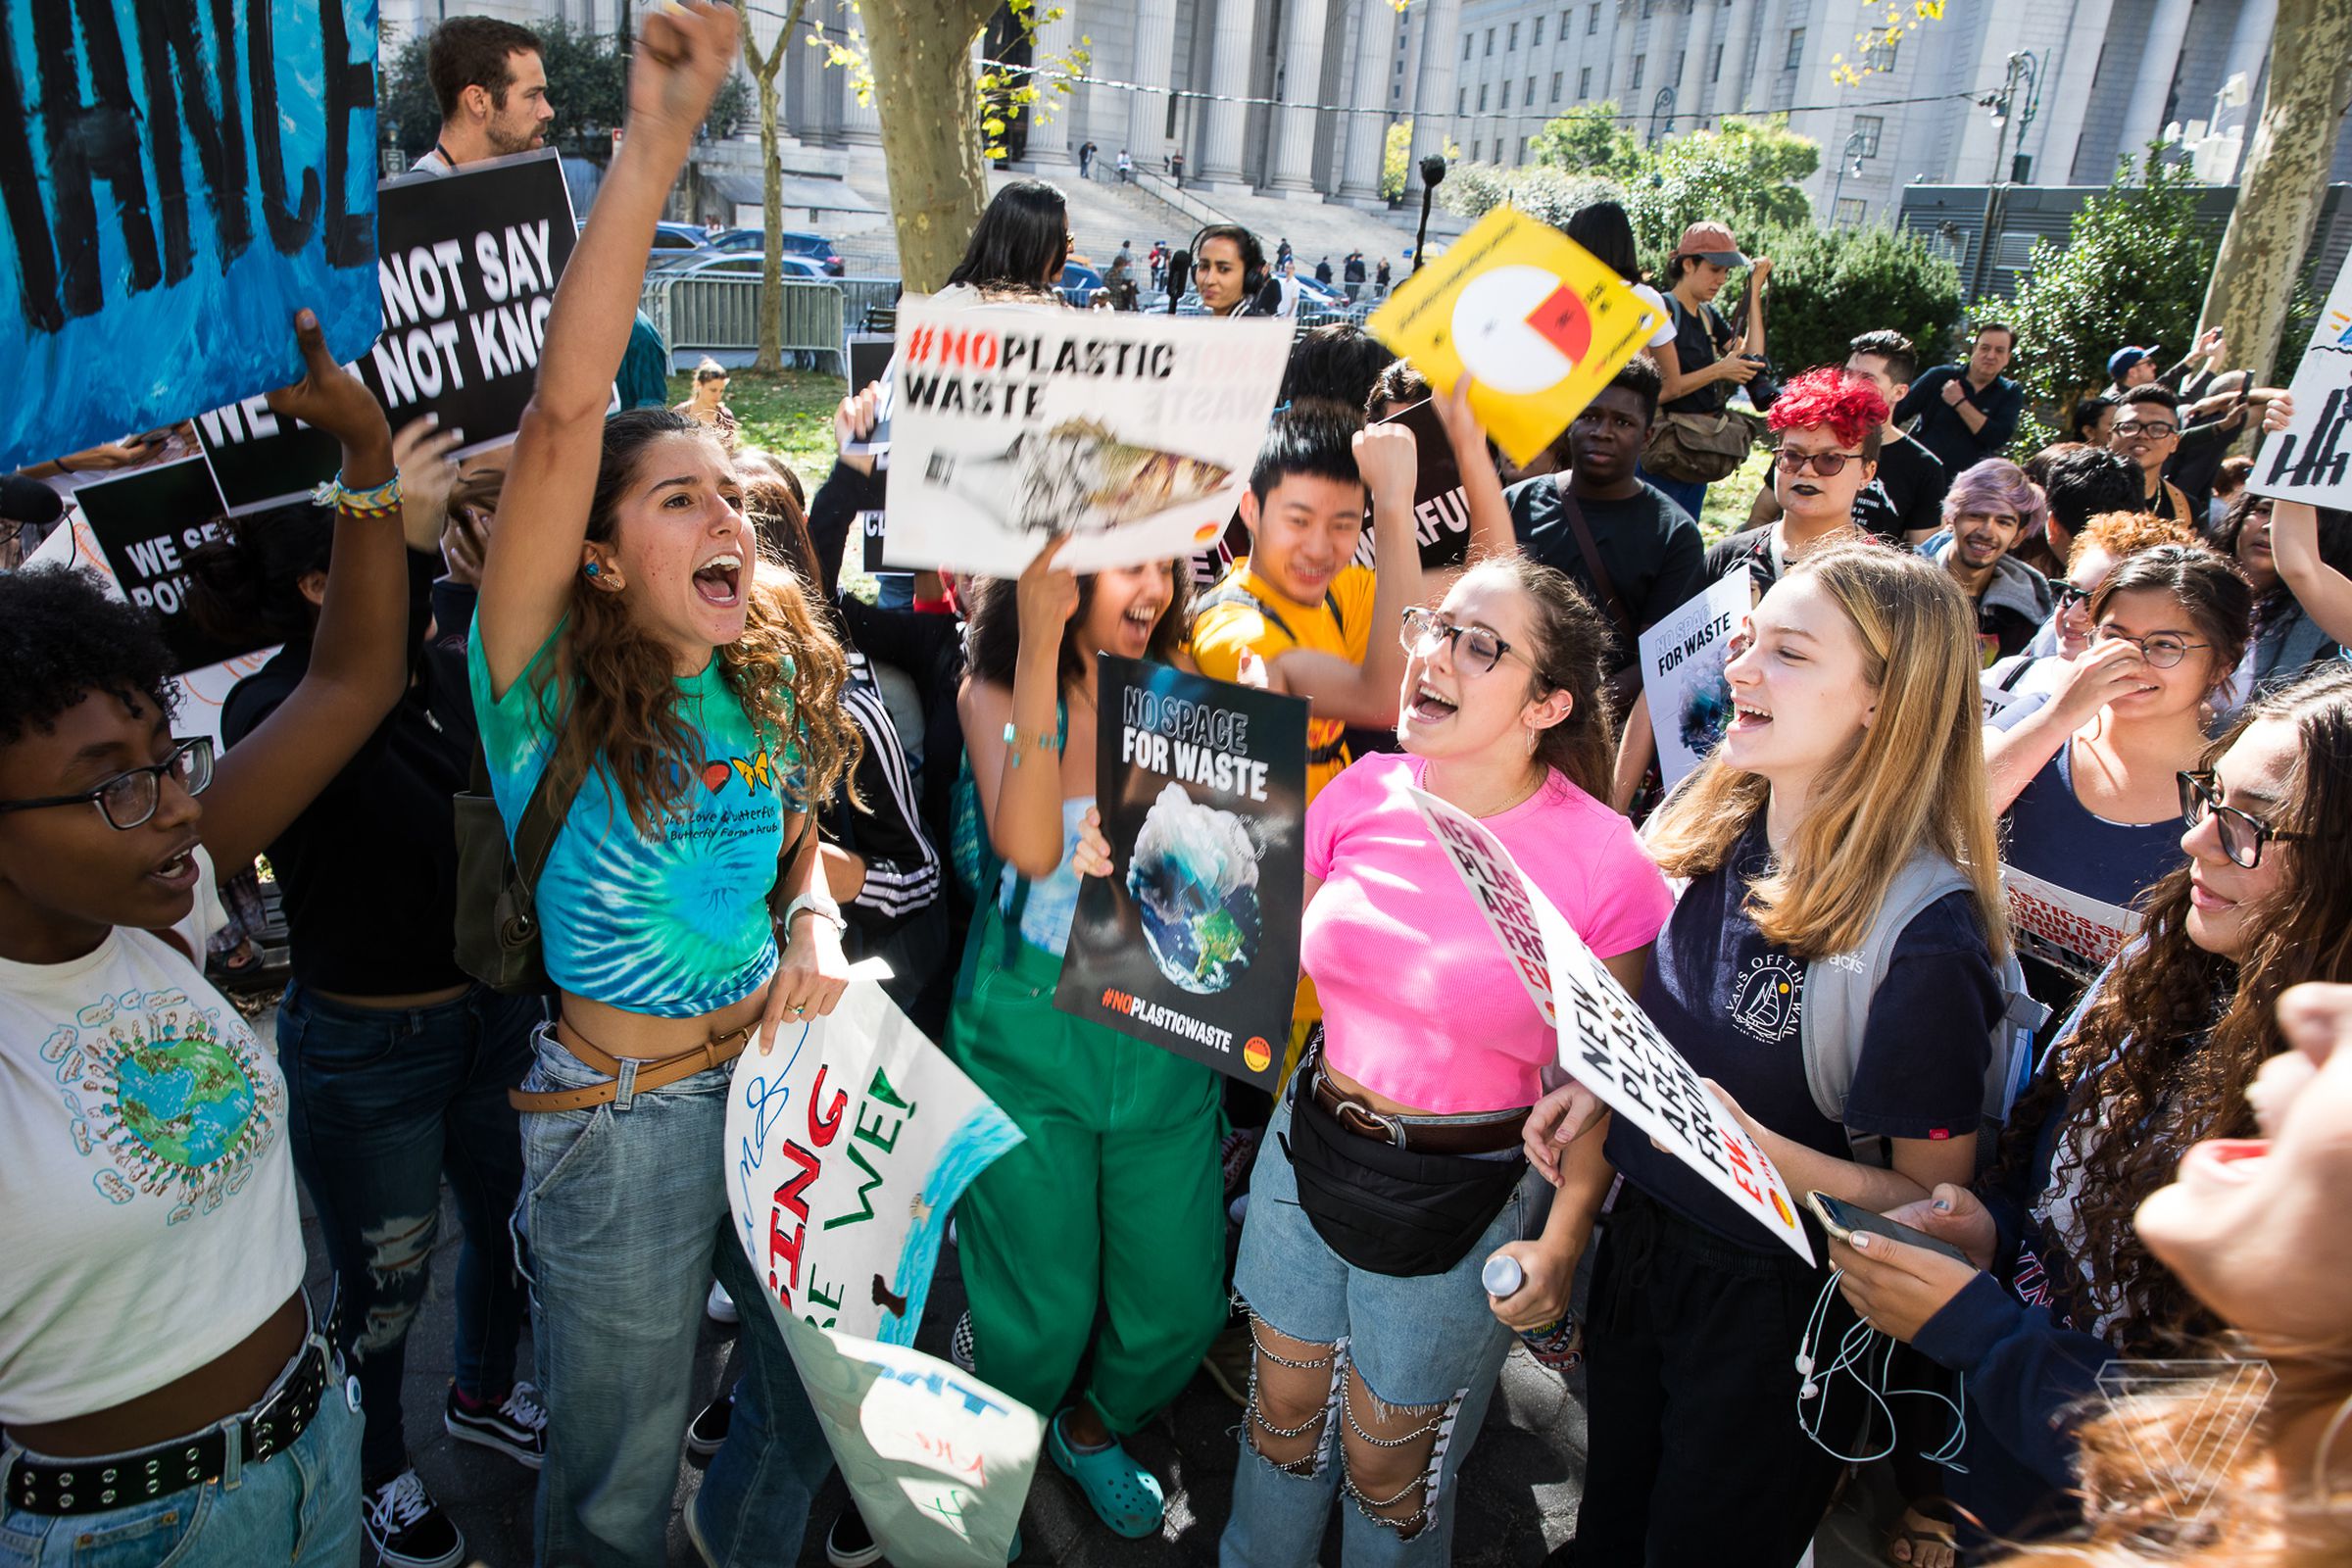 Tens of thousands of people took to the streets in New York City for the Global Climate Strike on September 20th, 2019.